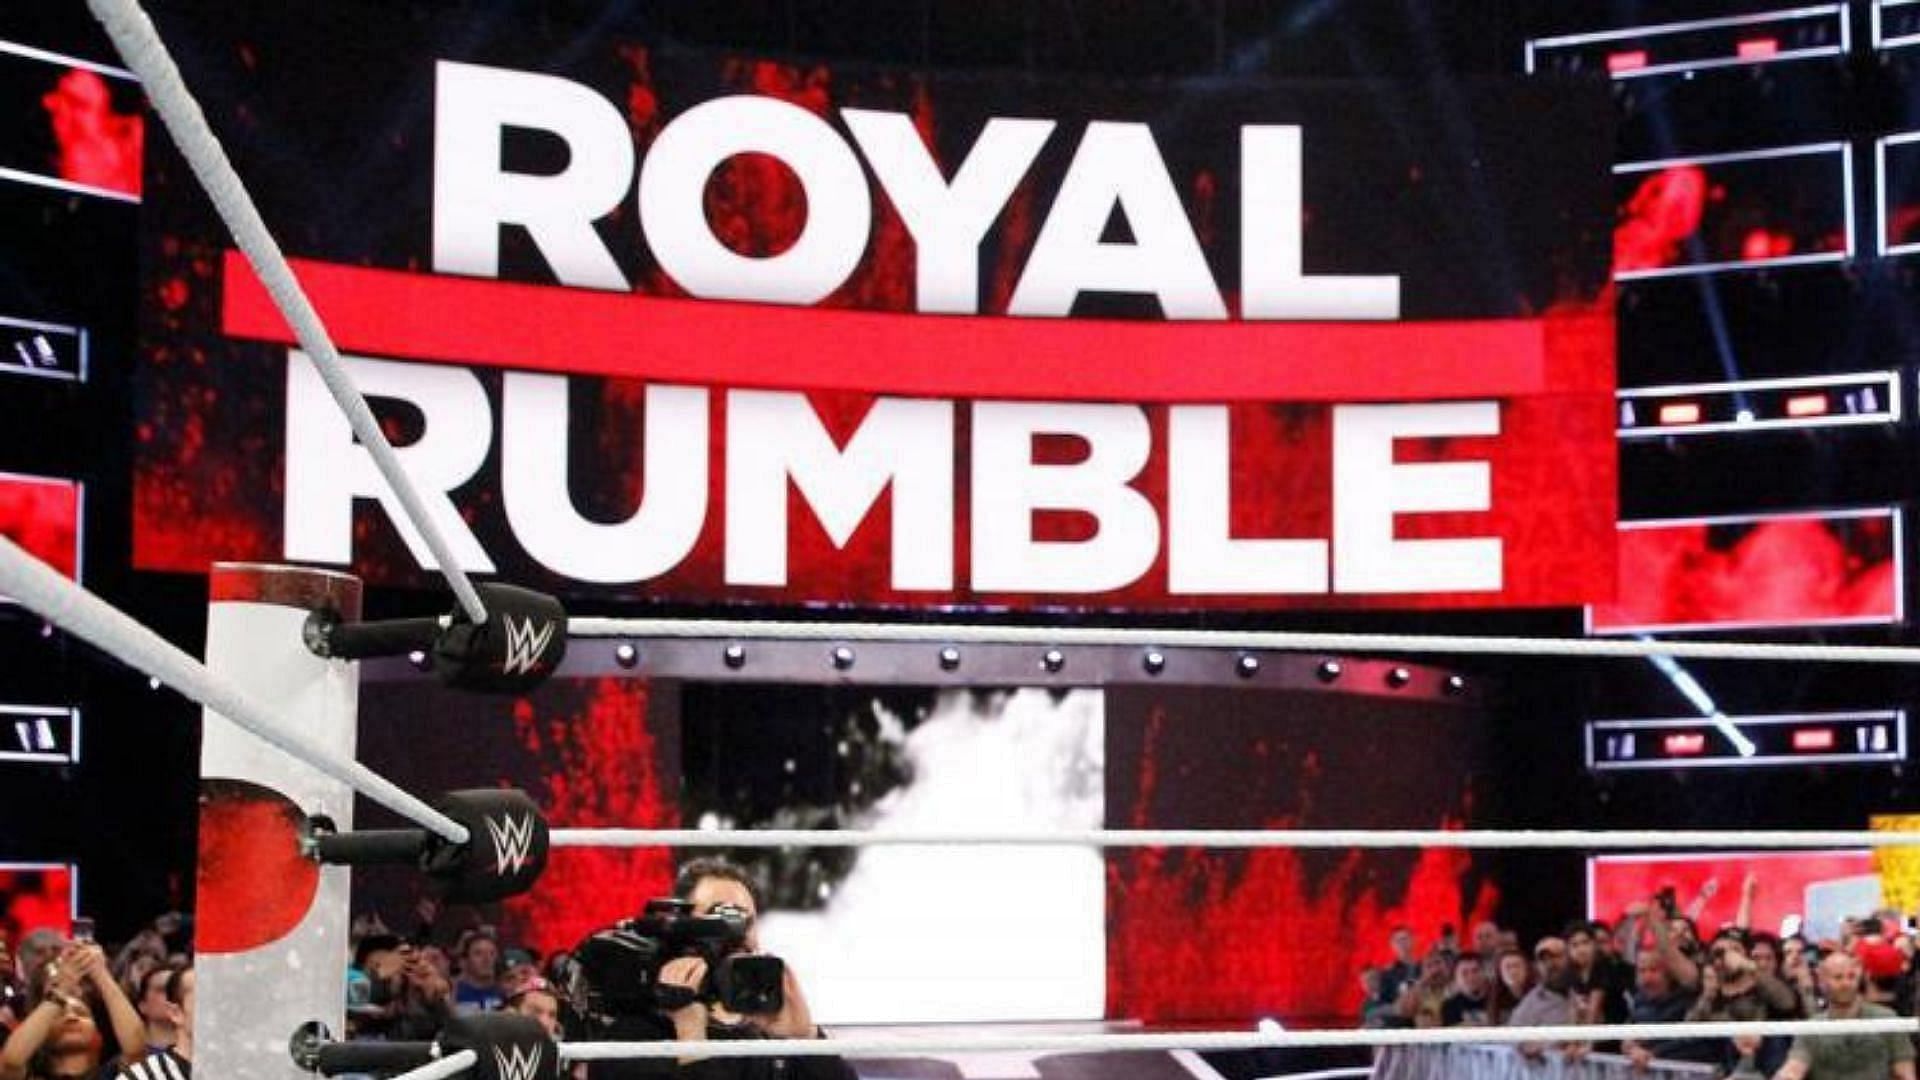 The Royal Rumble takes place every January